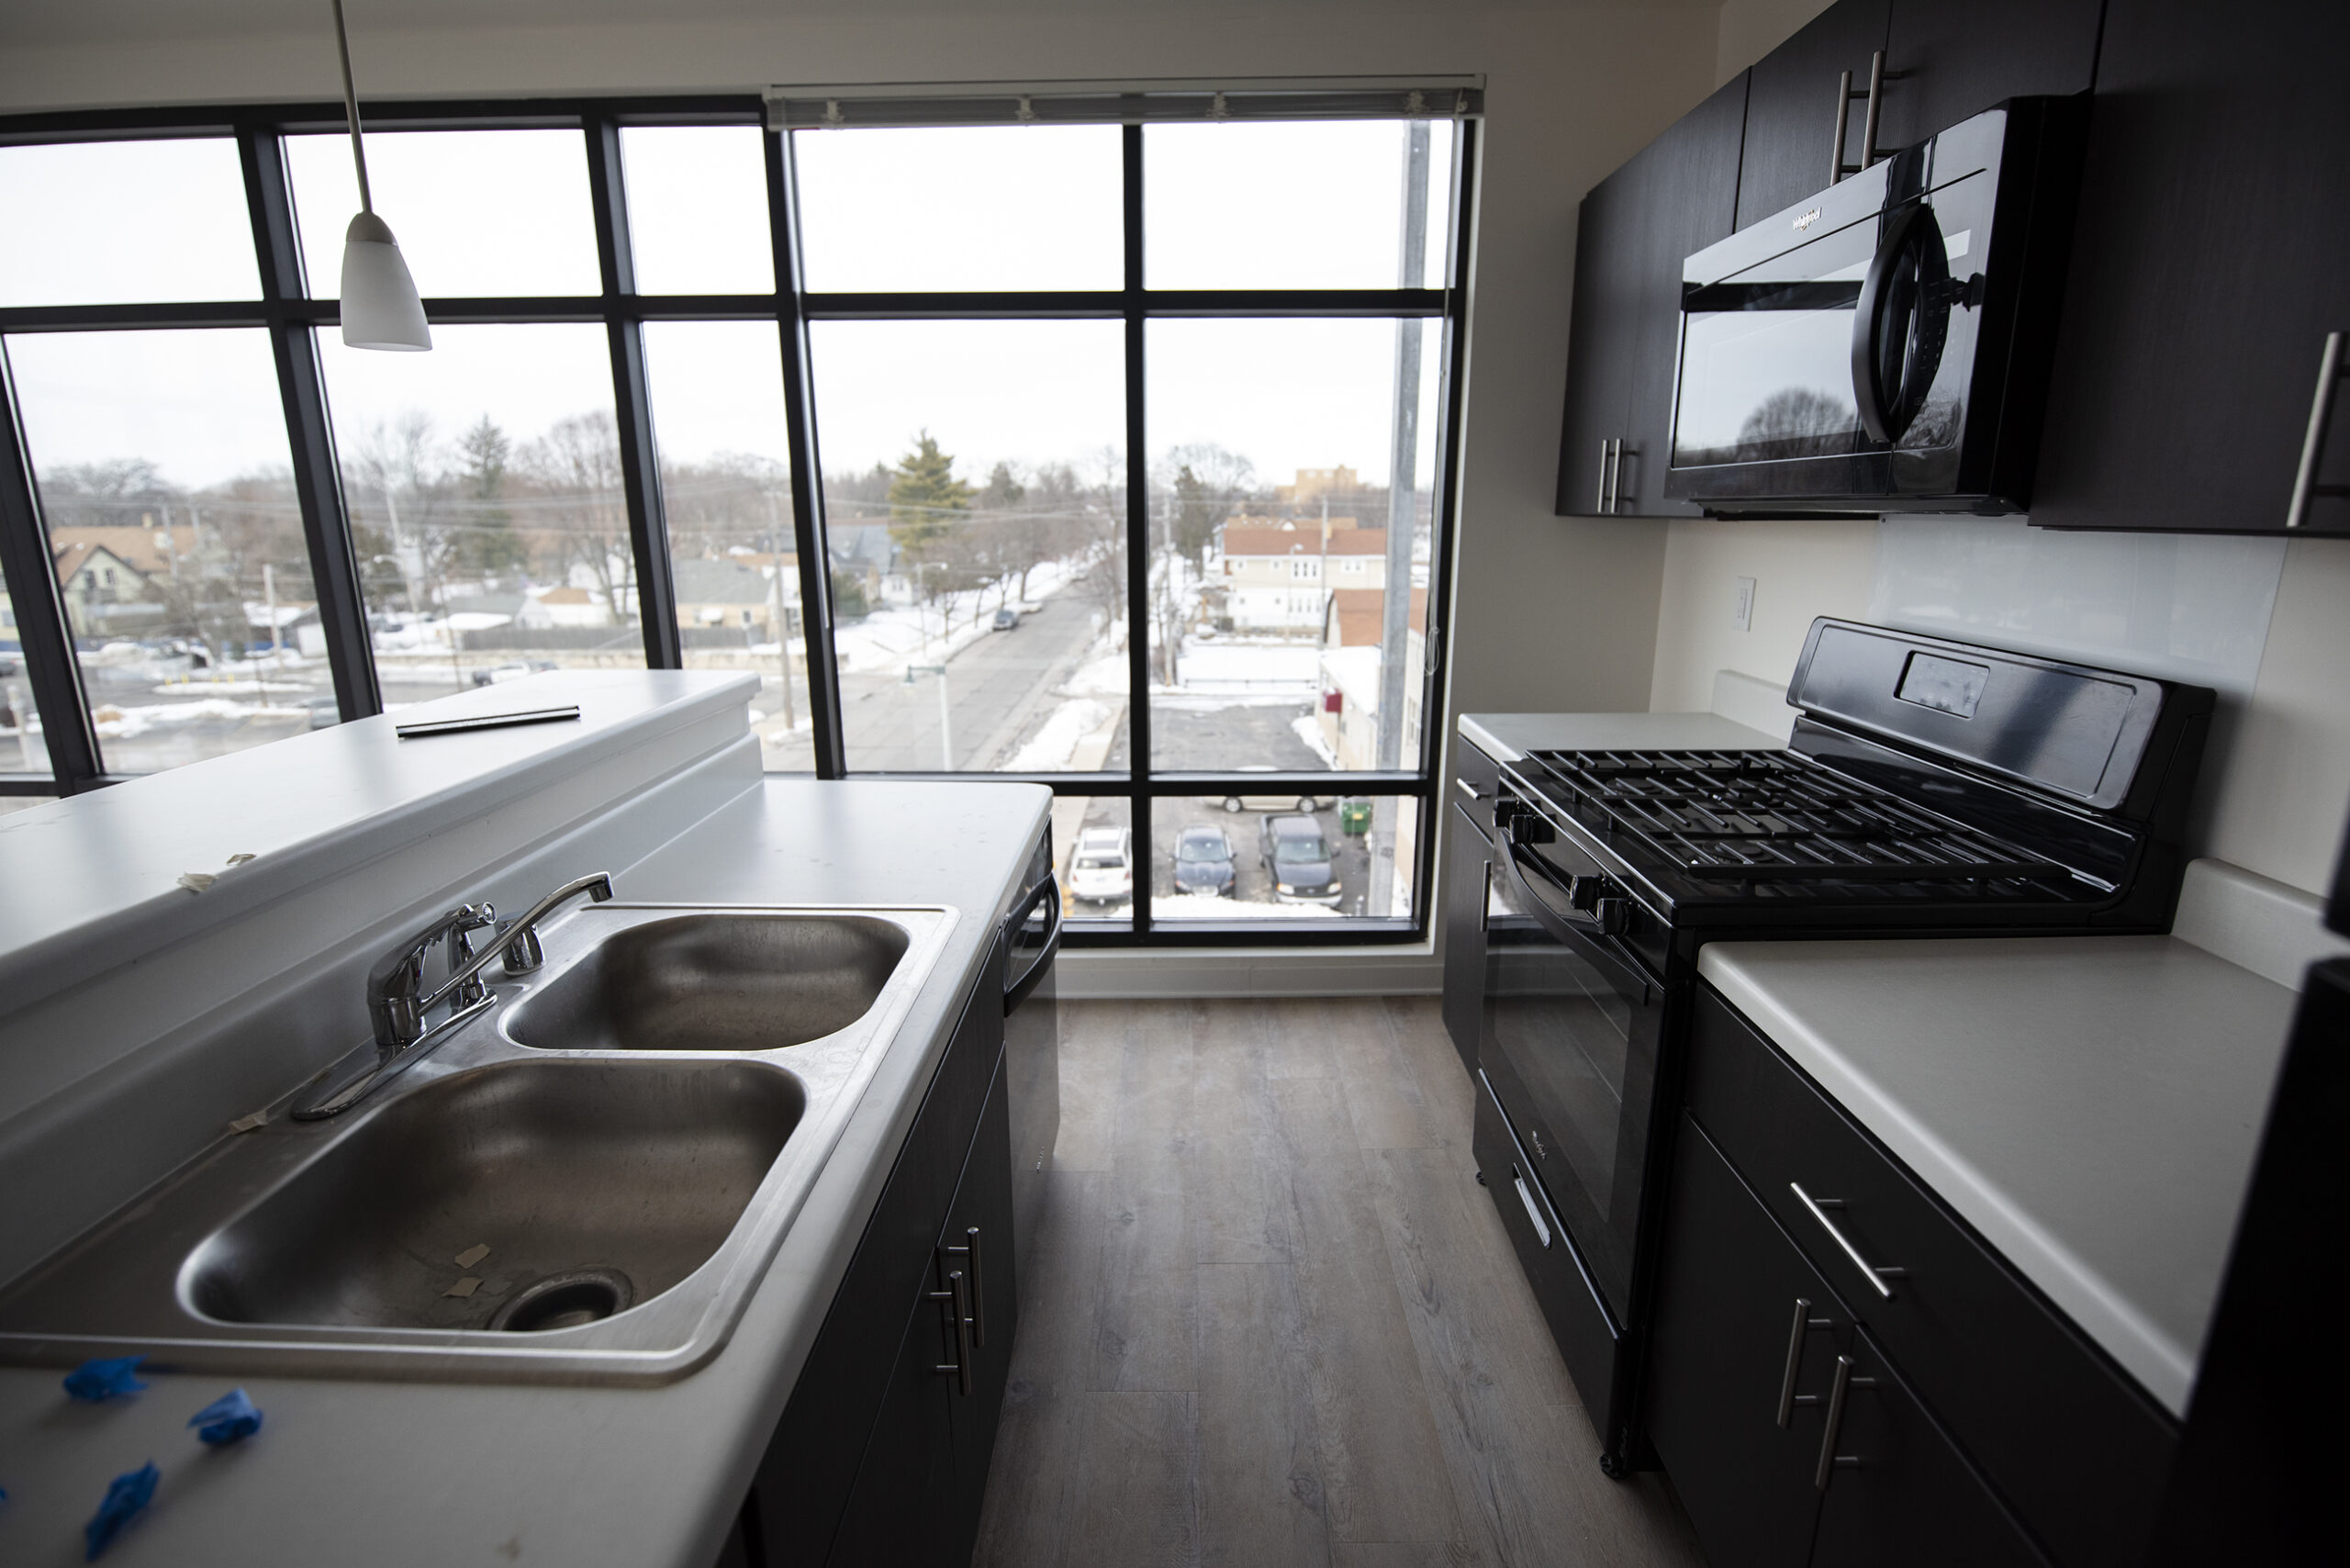 White countertops and black appliances create a small kitchen area that is surrounded by large windows taking up nearly the entire wall